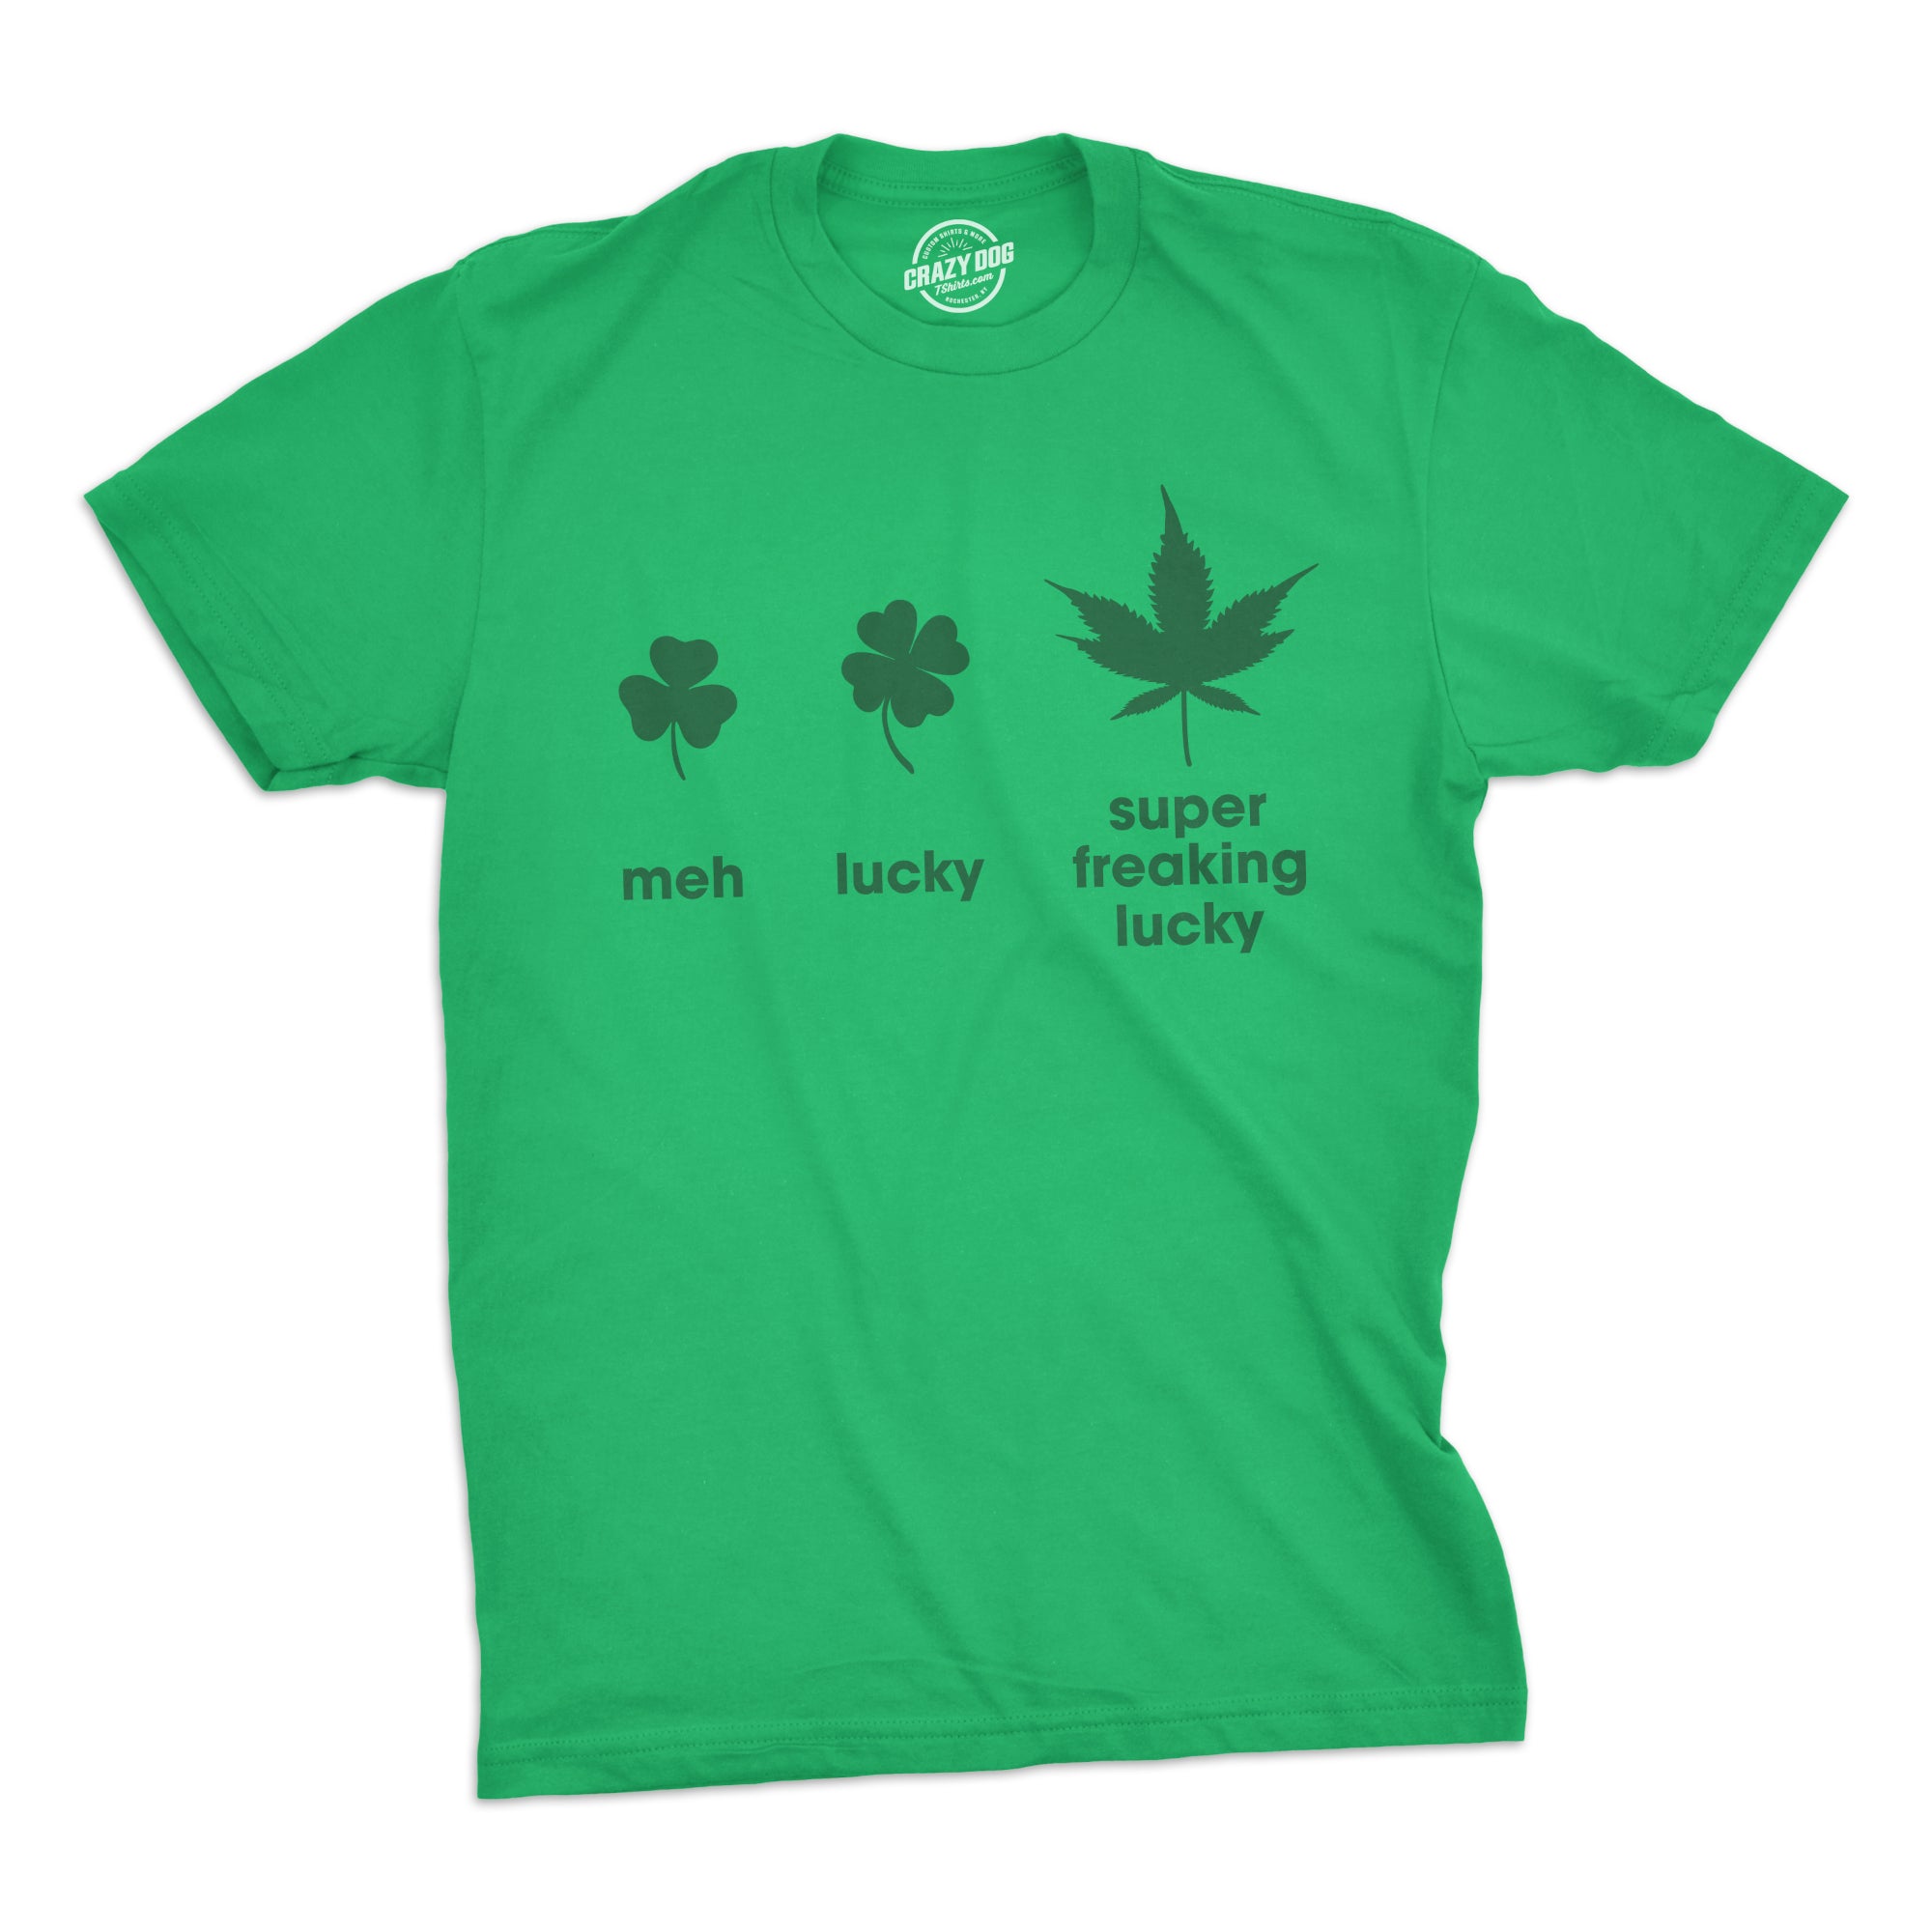 Funny Heather Green - Super Lucky Super Freaking Lucky Mens T Shirt Nerdy Saint Patrick's Day 420 Tee